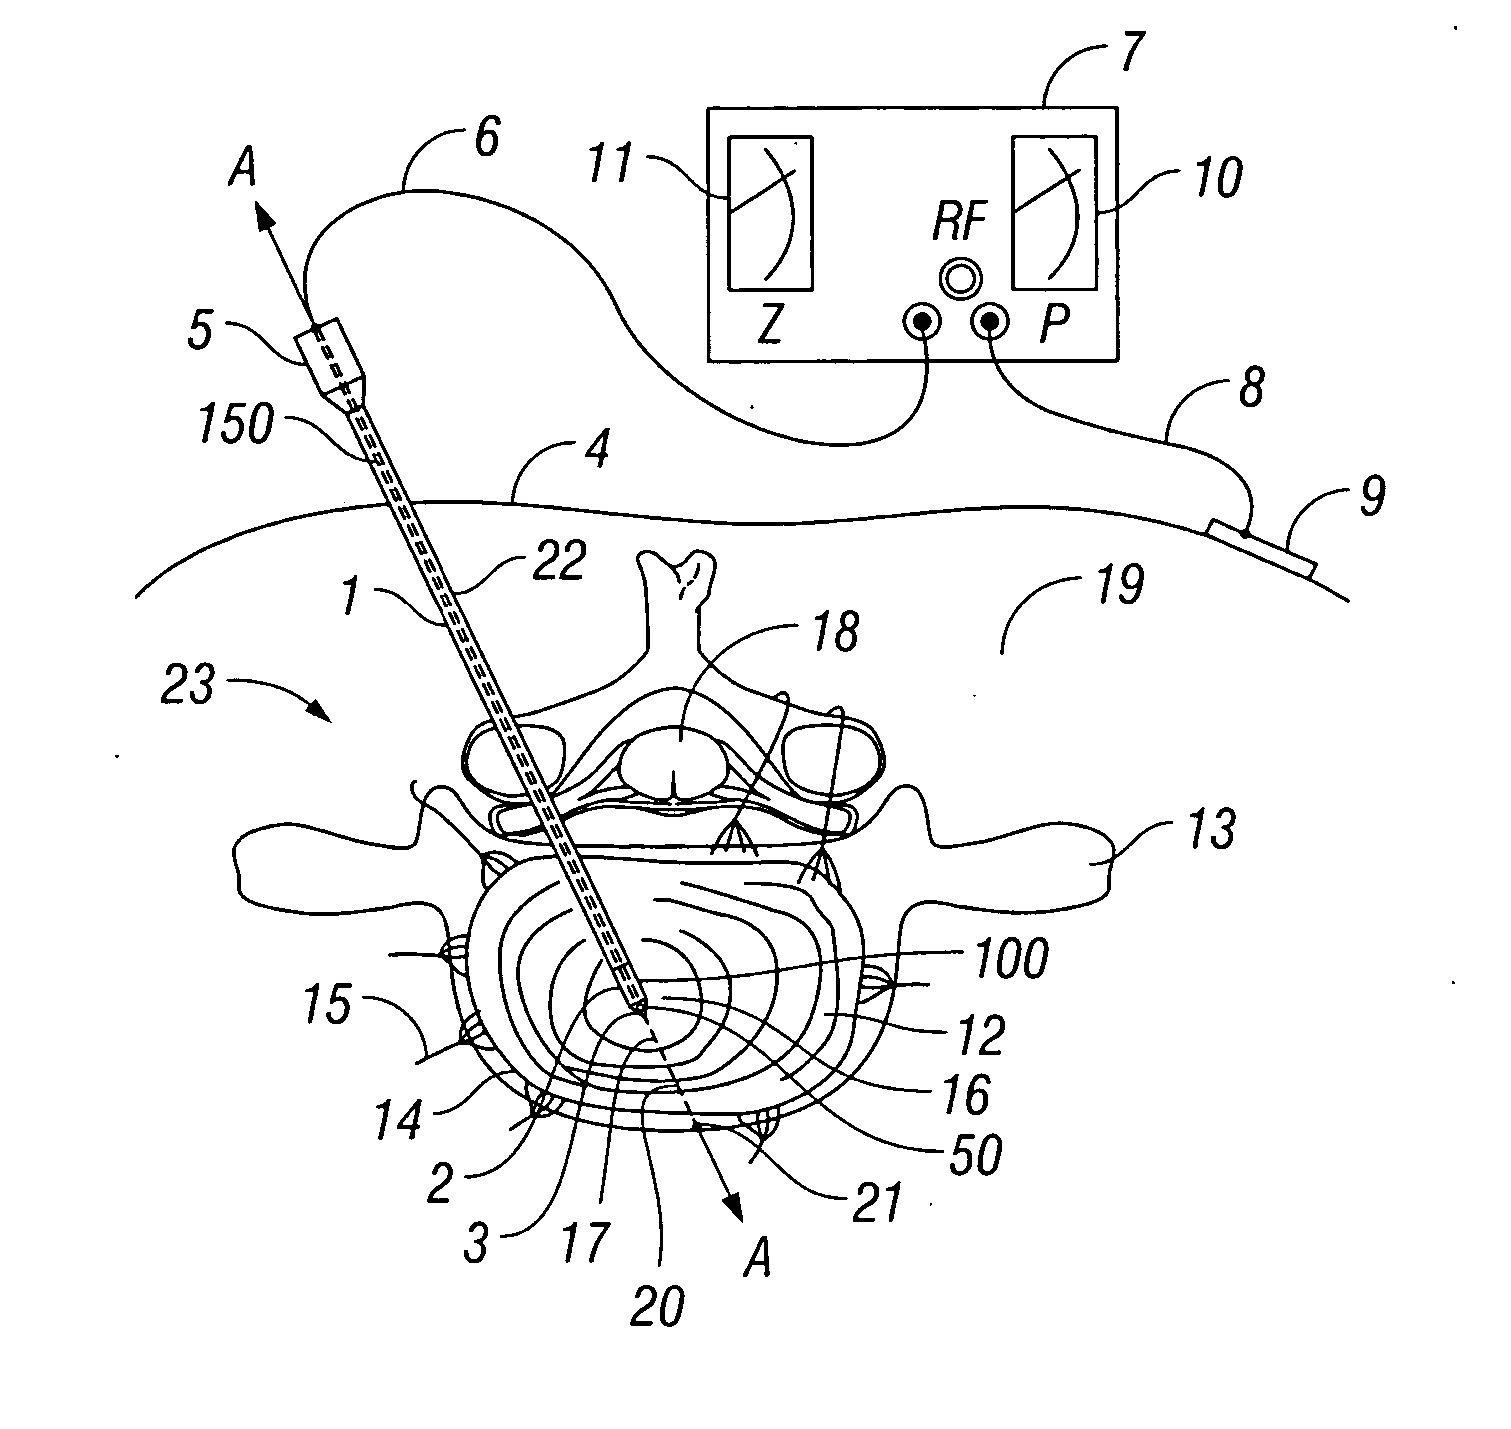 Method and apparatus for monitoring disc pressure during heat treatment of an intervertebral disc